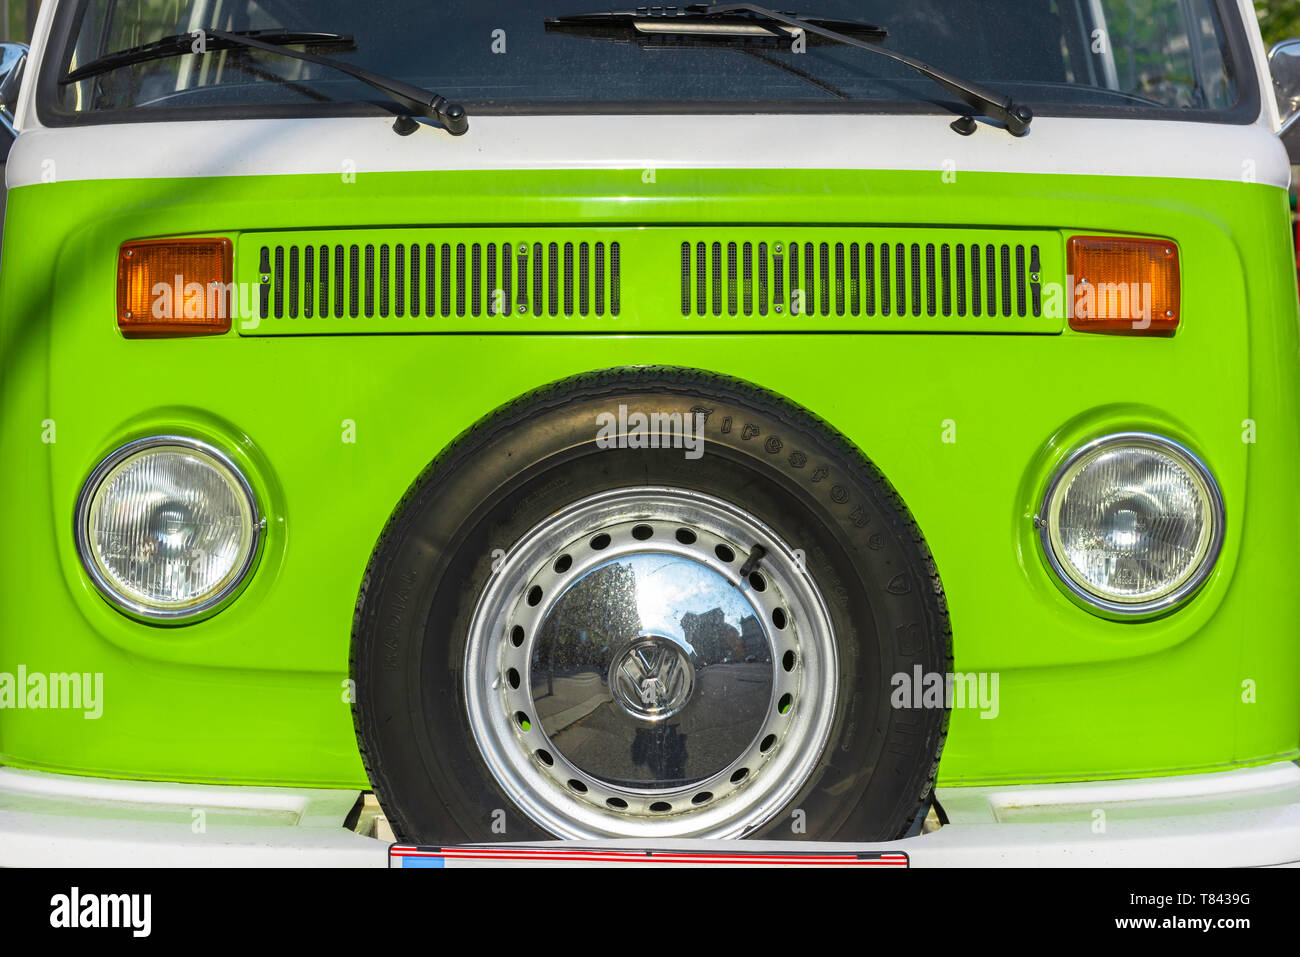 VW camper, view of the front of a classic 1970s VW camper van in bright green. Stock Photo